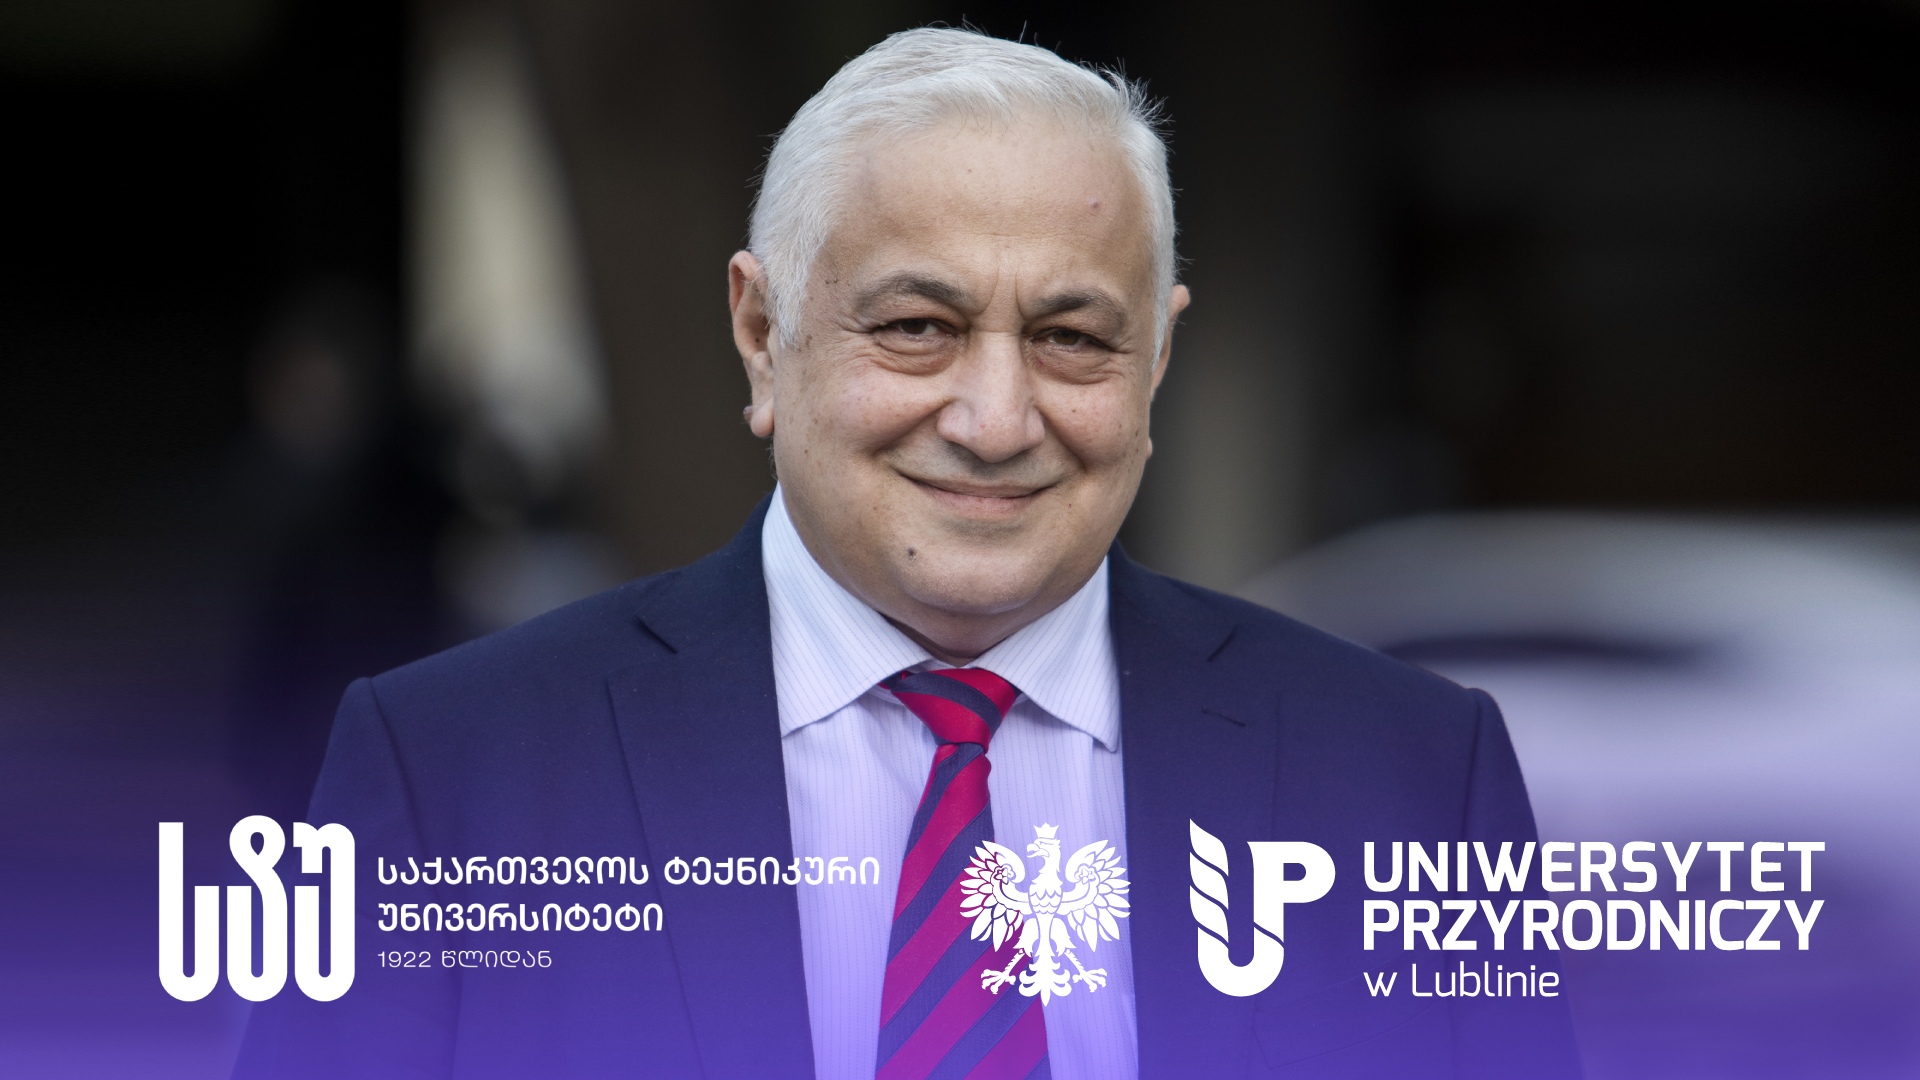 The University of Life Sciences in Lublin has honored GTU Rector, Academician Davit Gurgenidze, with the title of Honorary Doctor